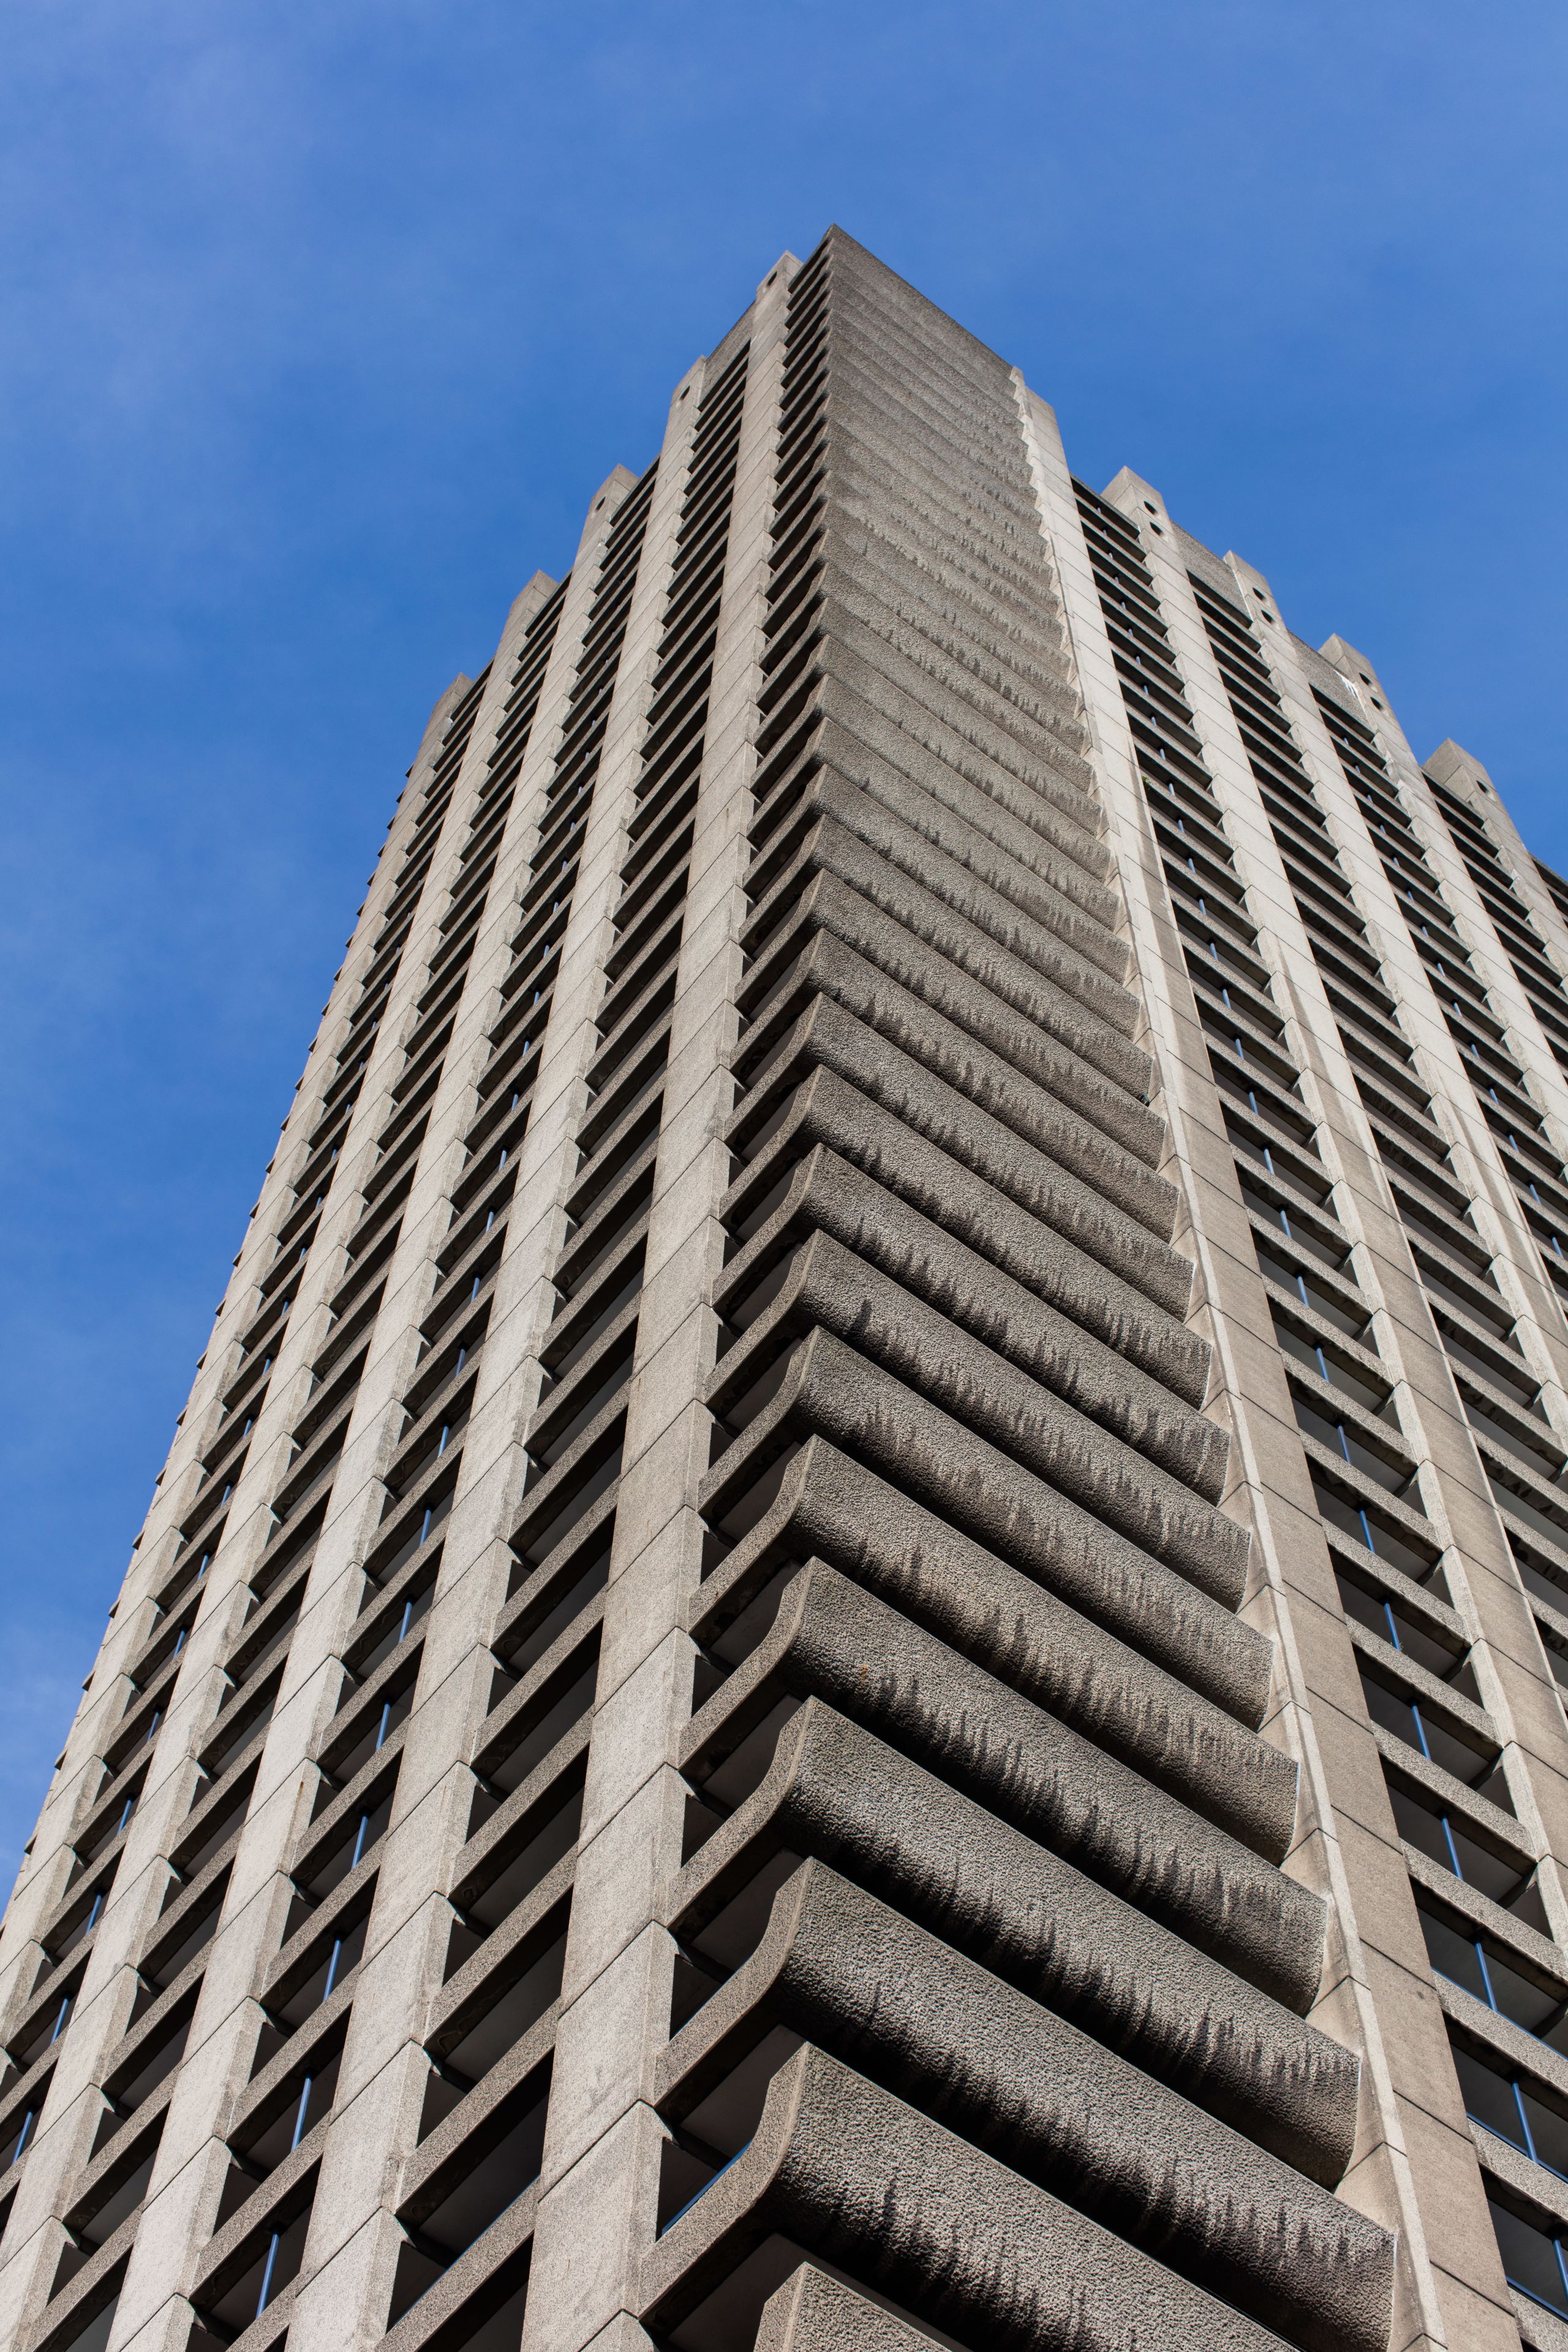 Photo of the Barbican towers. Credit: Anton Rodriguez